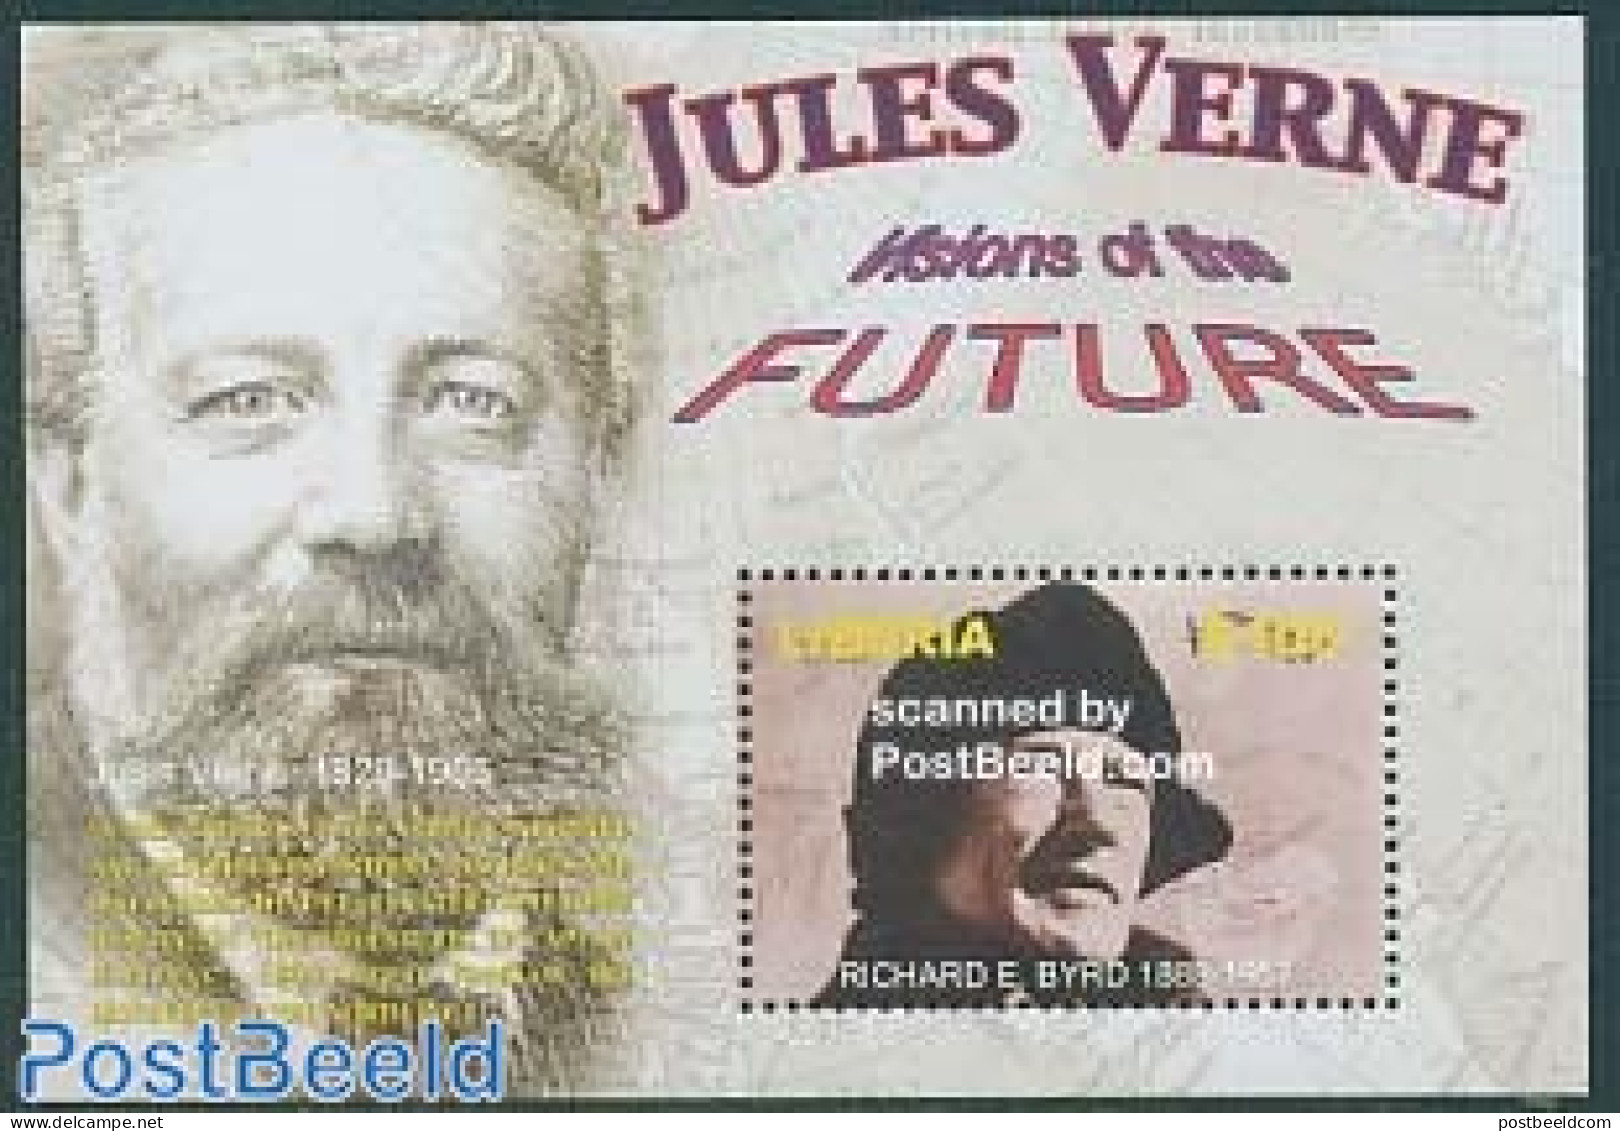 Liberia 2005 Jules Verne S/s, Mint NH, Various - Maps - Art - Authors - Jules Verne - Science Fiction - Geography